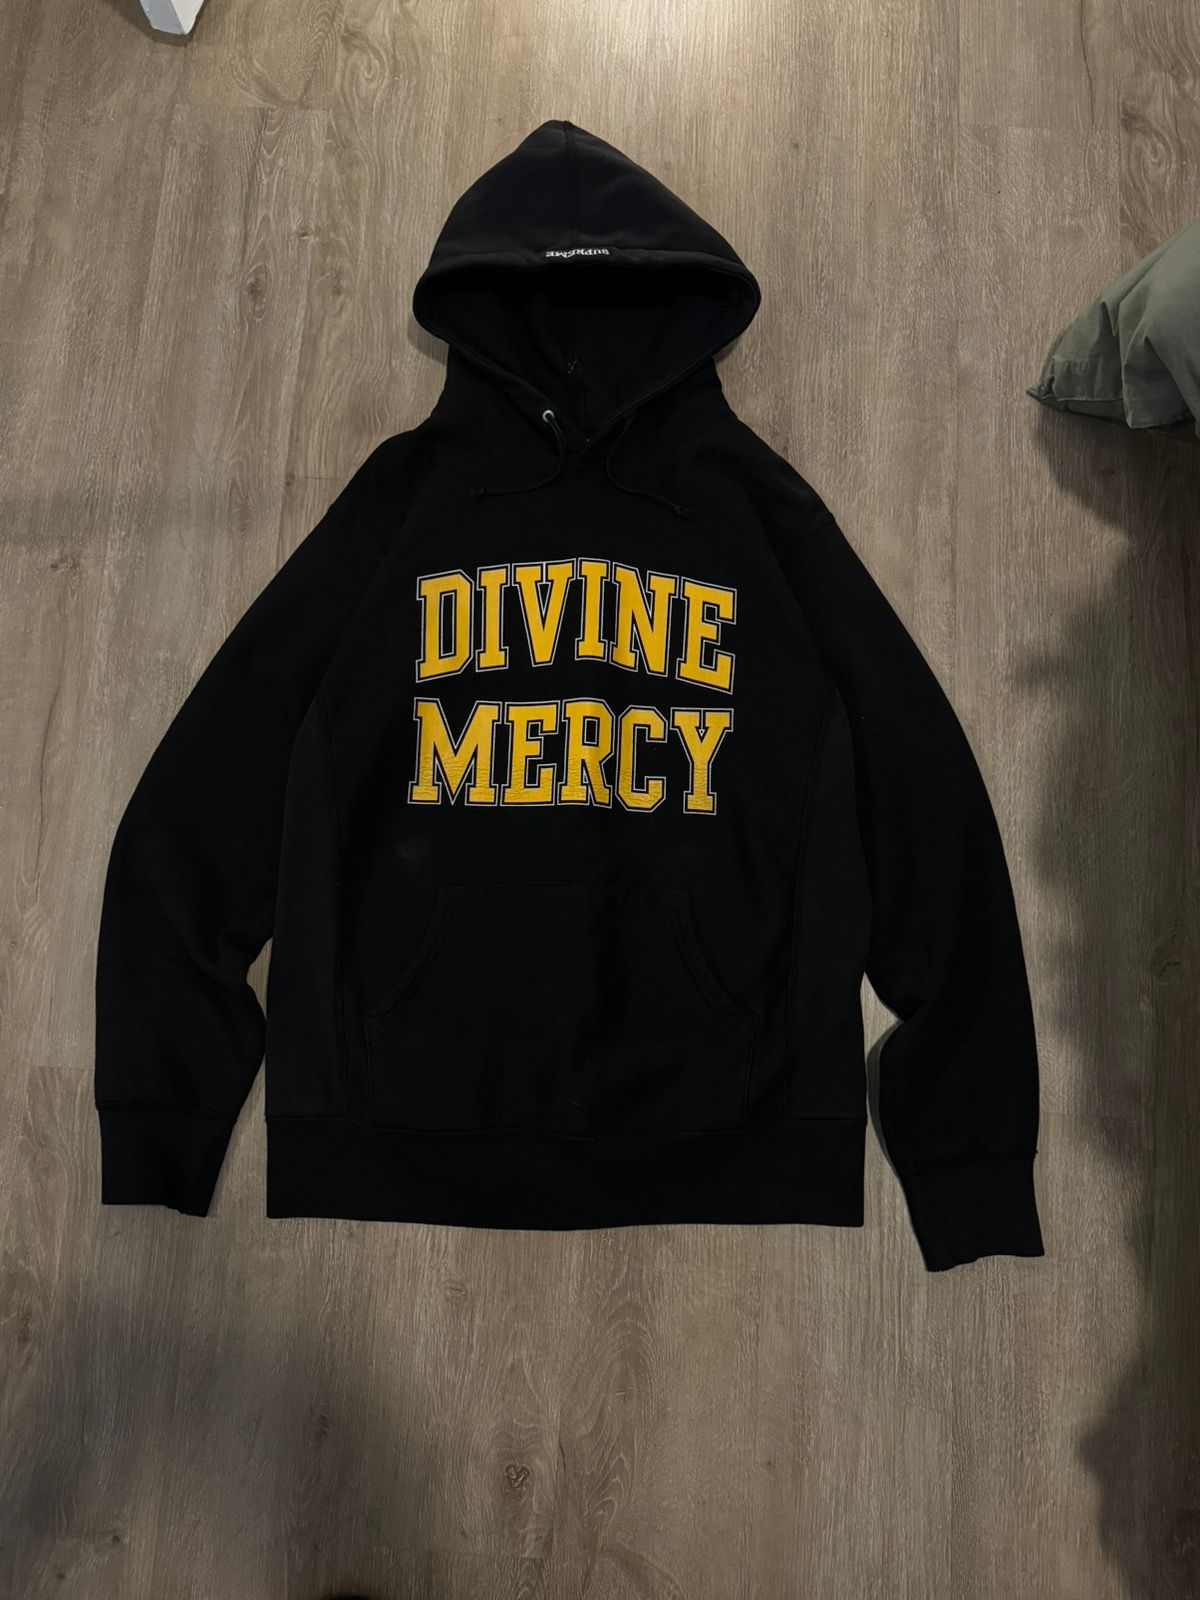 Pre-owned Supreme Divine Mercy Hoodie Black Yellow